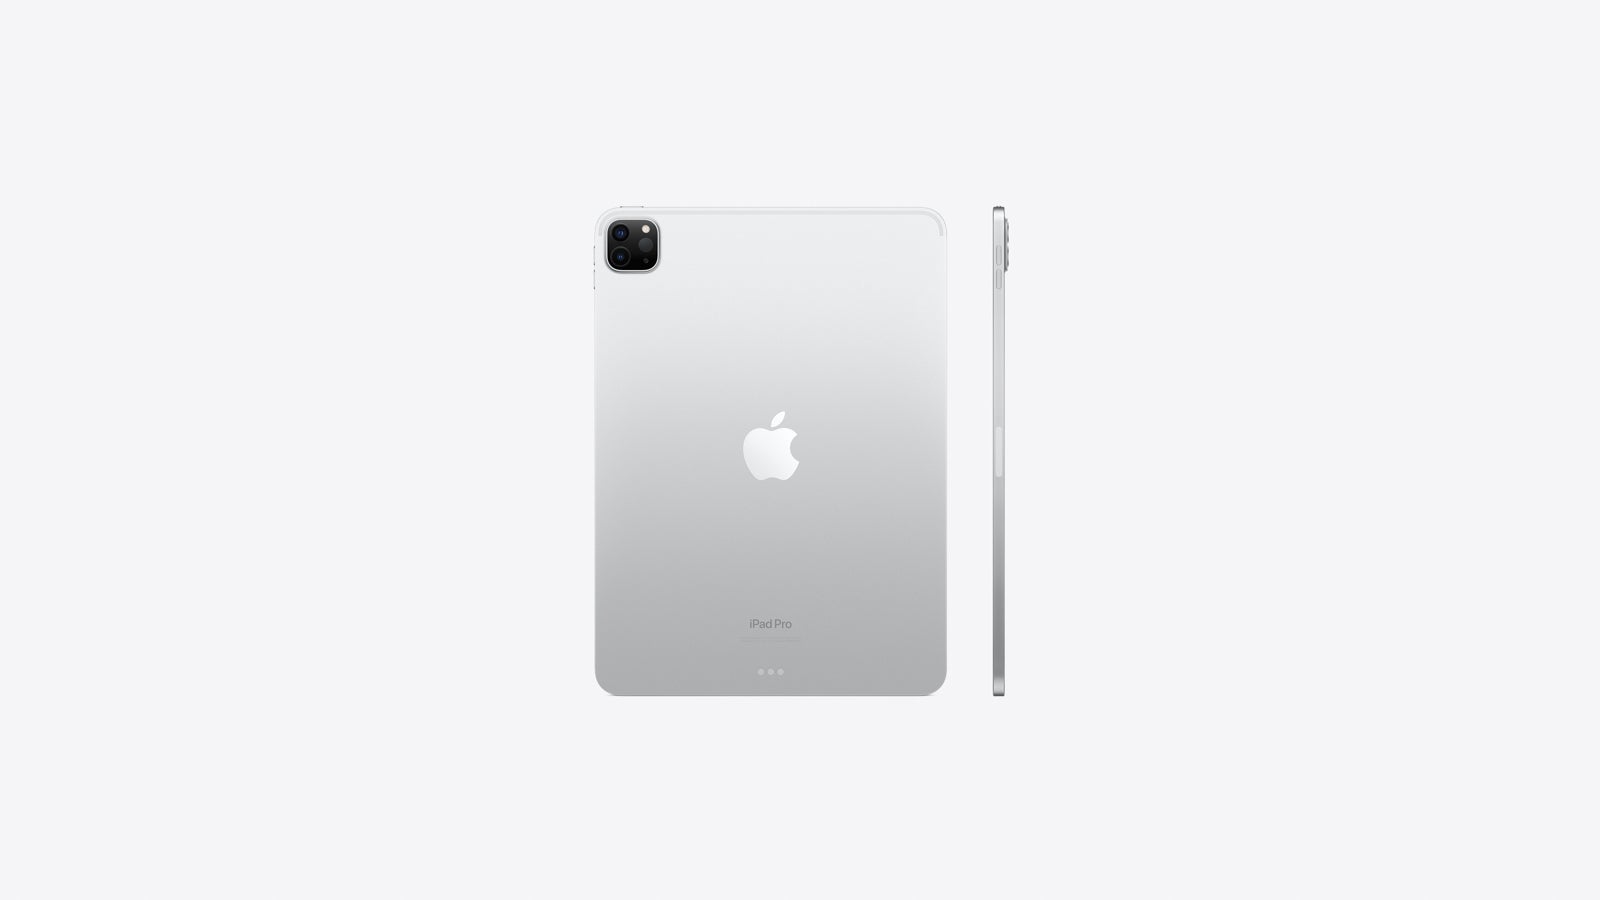 iPad Pro from 2022 showcasing the Silver color option - iPad Pro (2024) colors: expectations